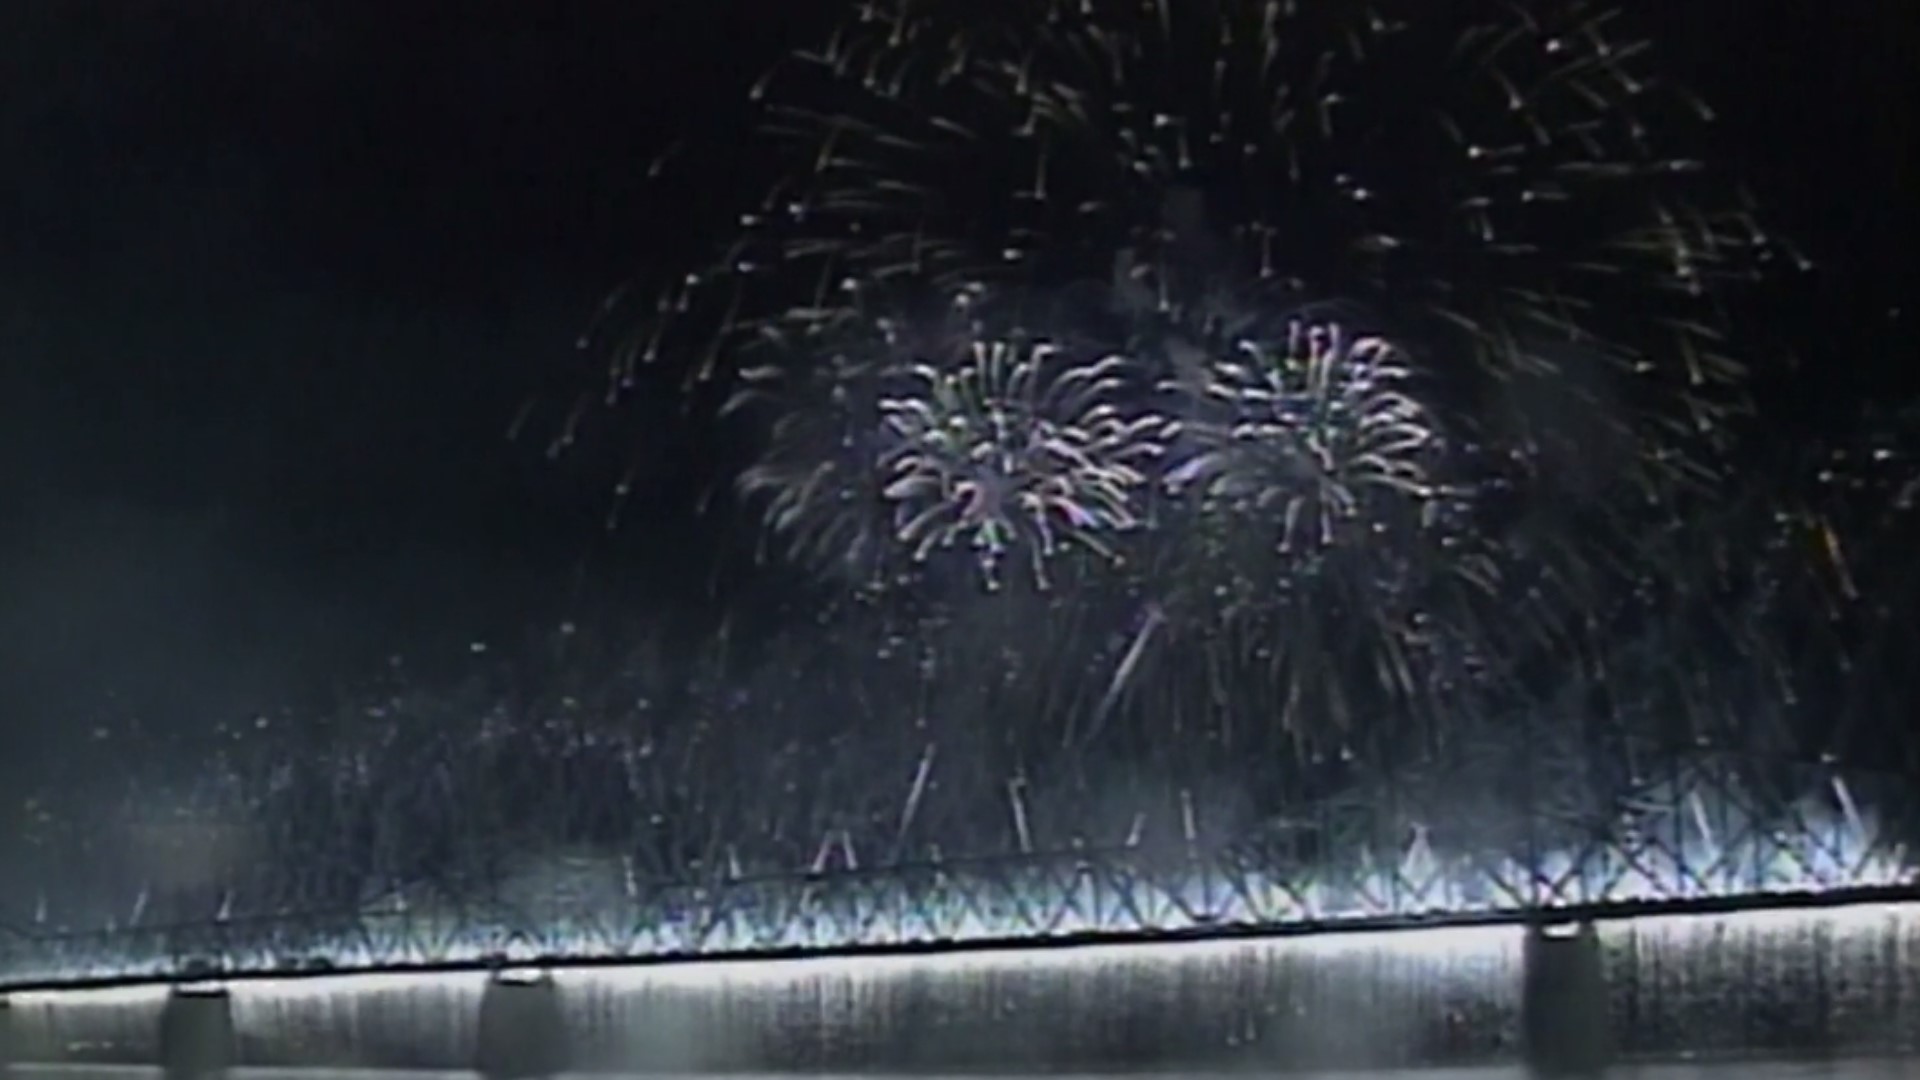 WHAS11 was the official broadcaster of Thunder Over Louisville in 1999. We had crews on both sides of the Ohio river to bring the best coverage of the event.